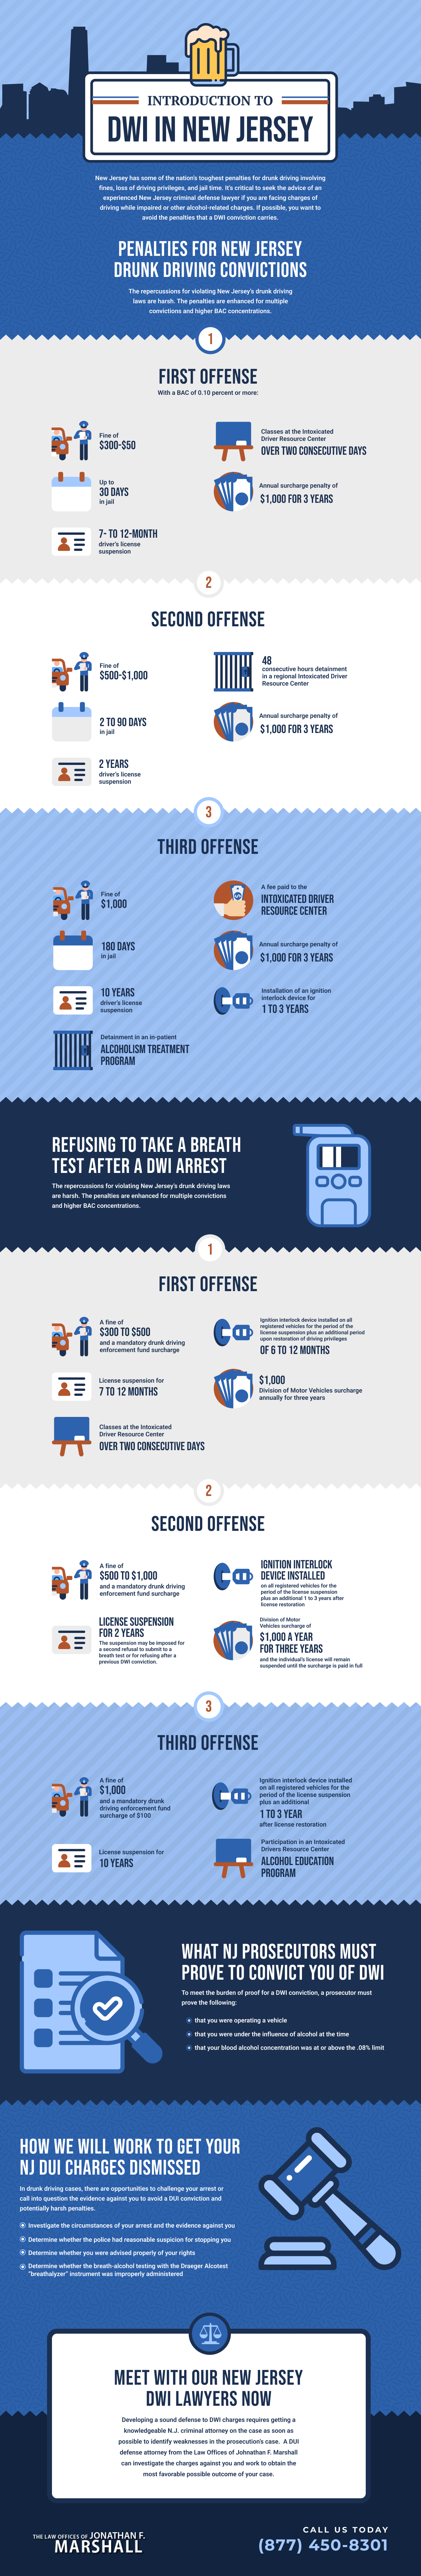 DWI in New Jersey